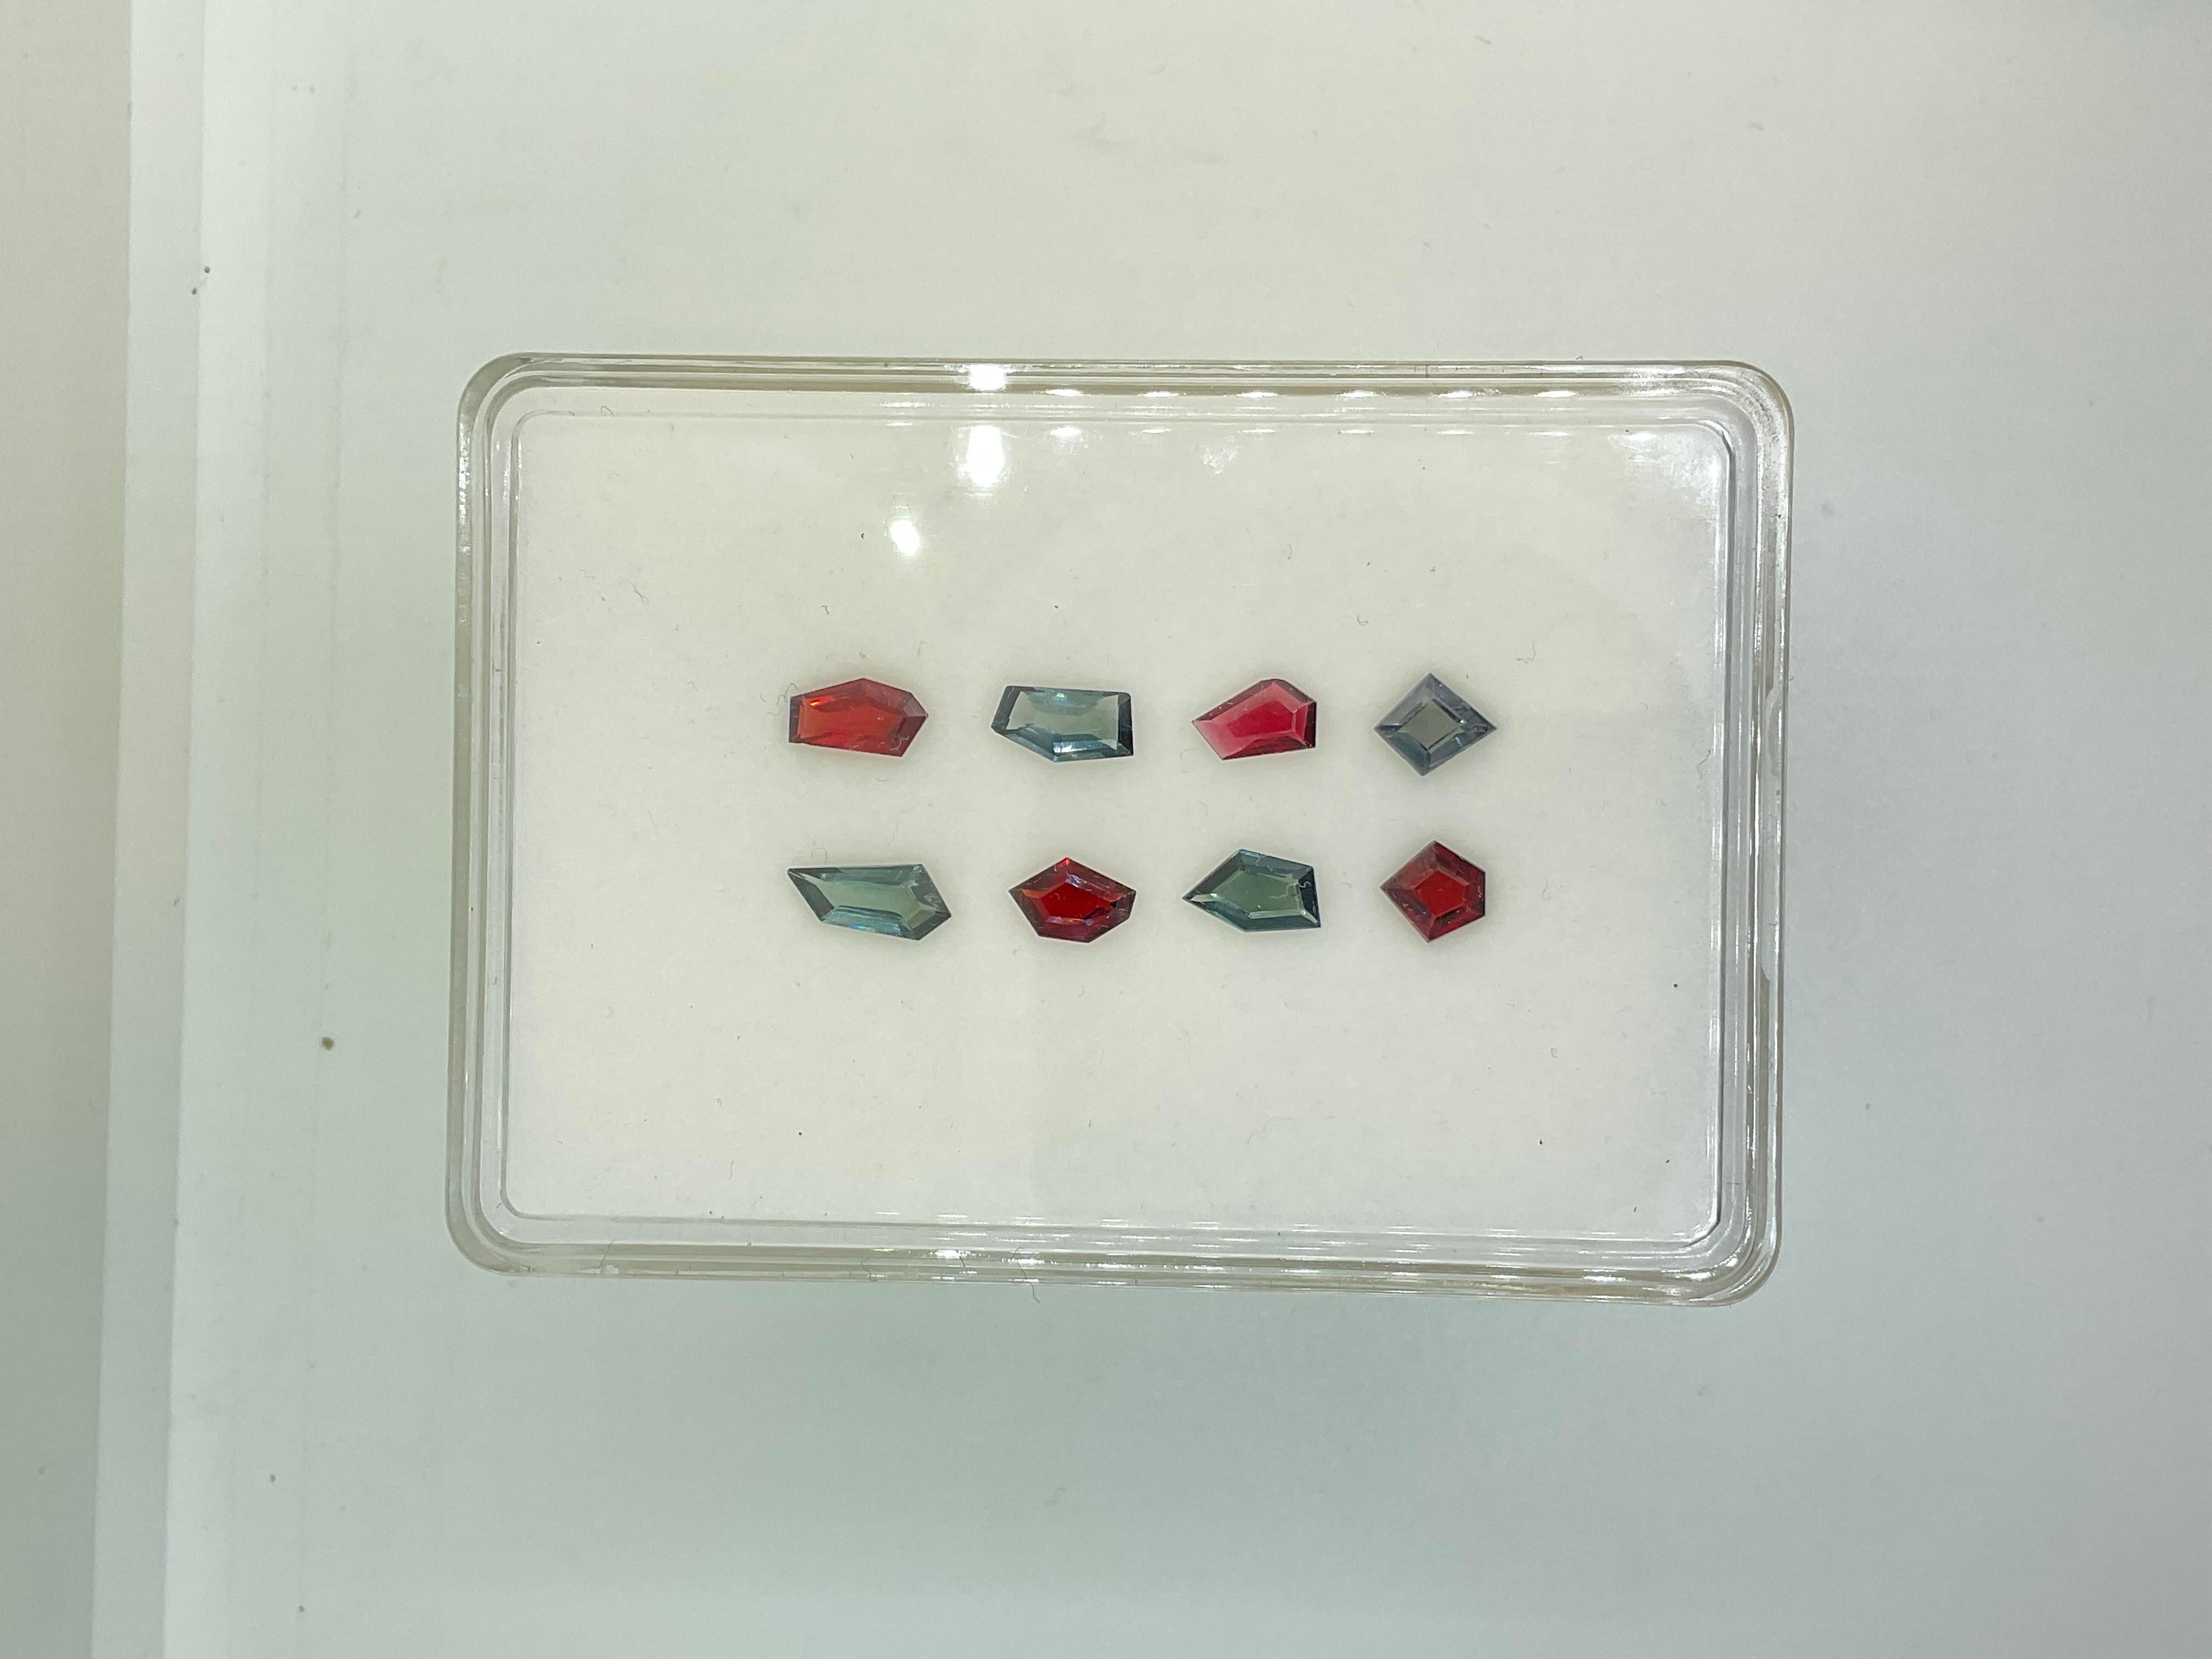 6.50 Carats Grey & Red Spinel Fancy Cut Stone Natural Gem For Top Fine Jewelry

Gemstone: Spinel
Weight: 6.50 Carats
Size: 5 To 5x11 MM
Pieces: 8
Shape: Fancy Cut stones